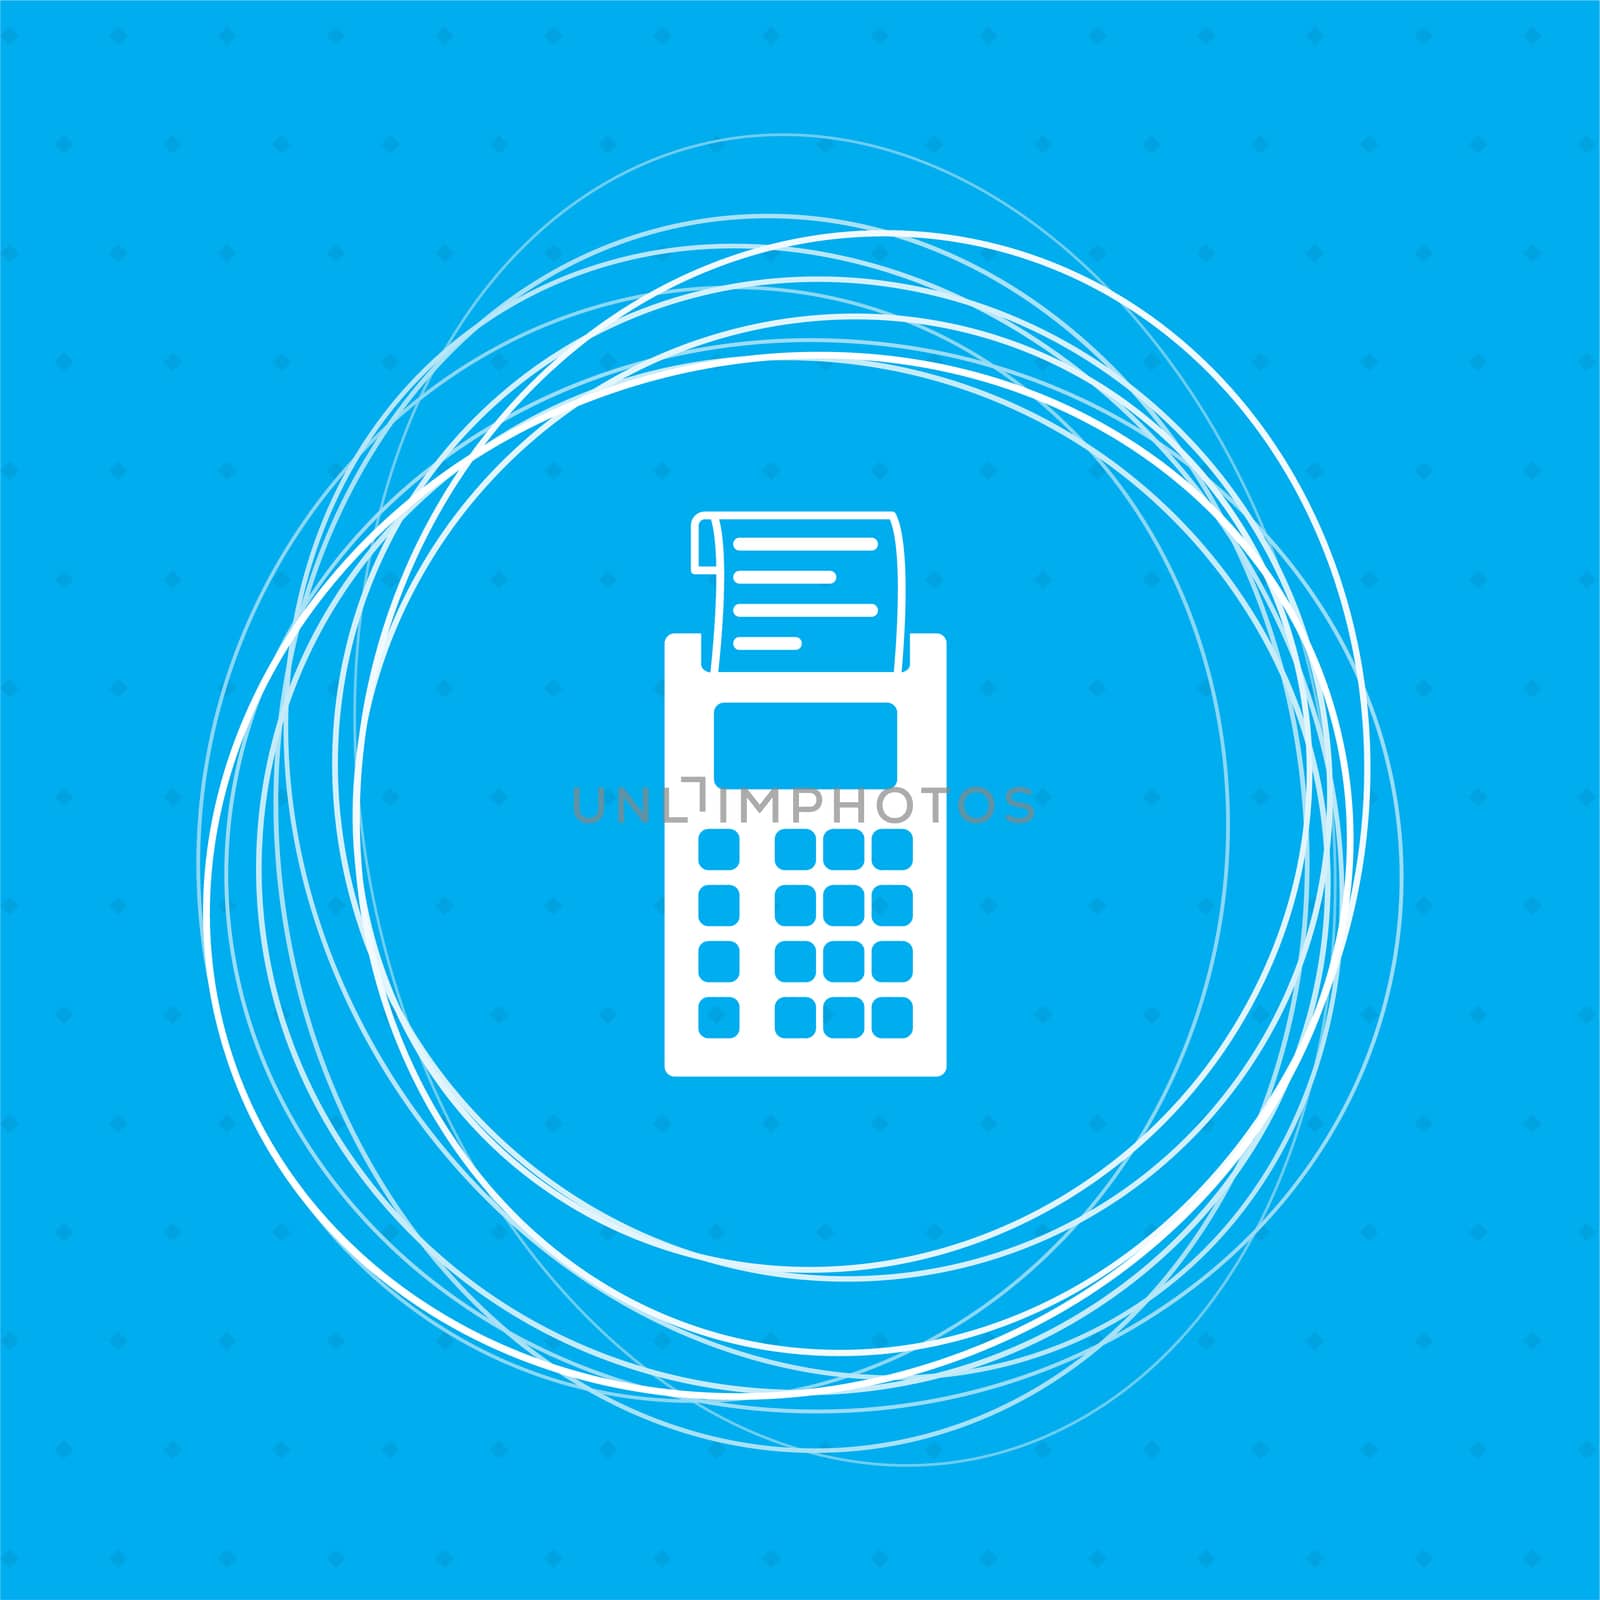 calculator icon on a blue background with abstract circles around and place for your text. illustration